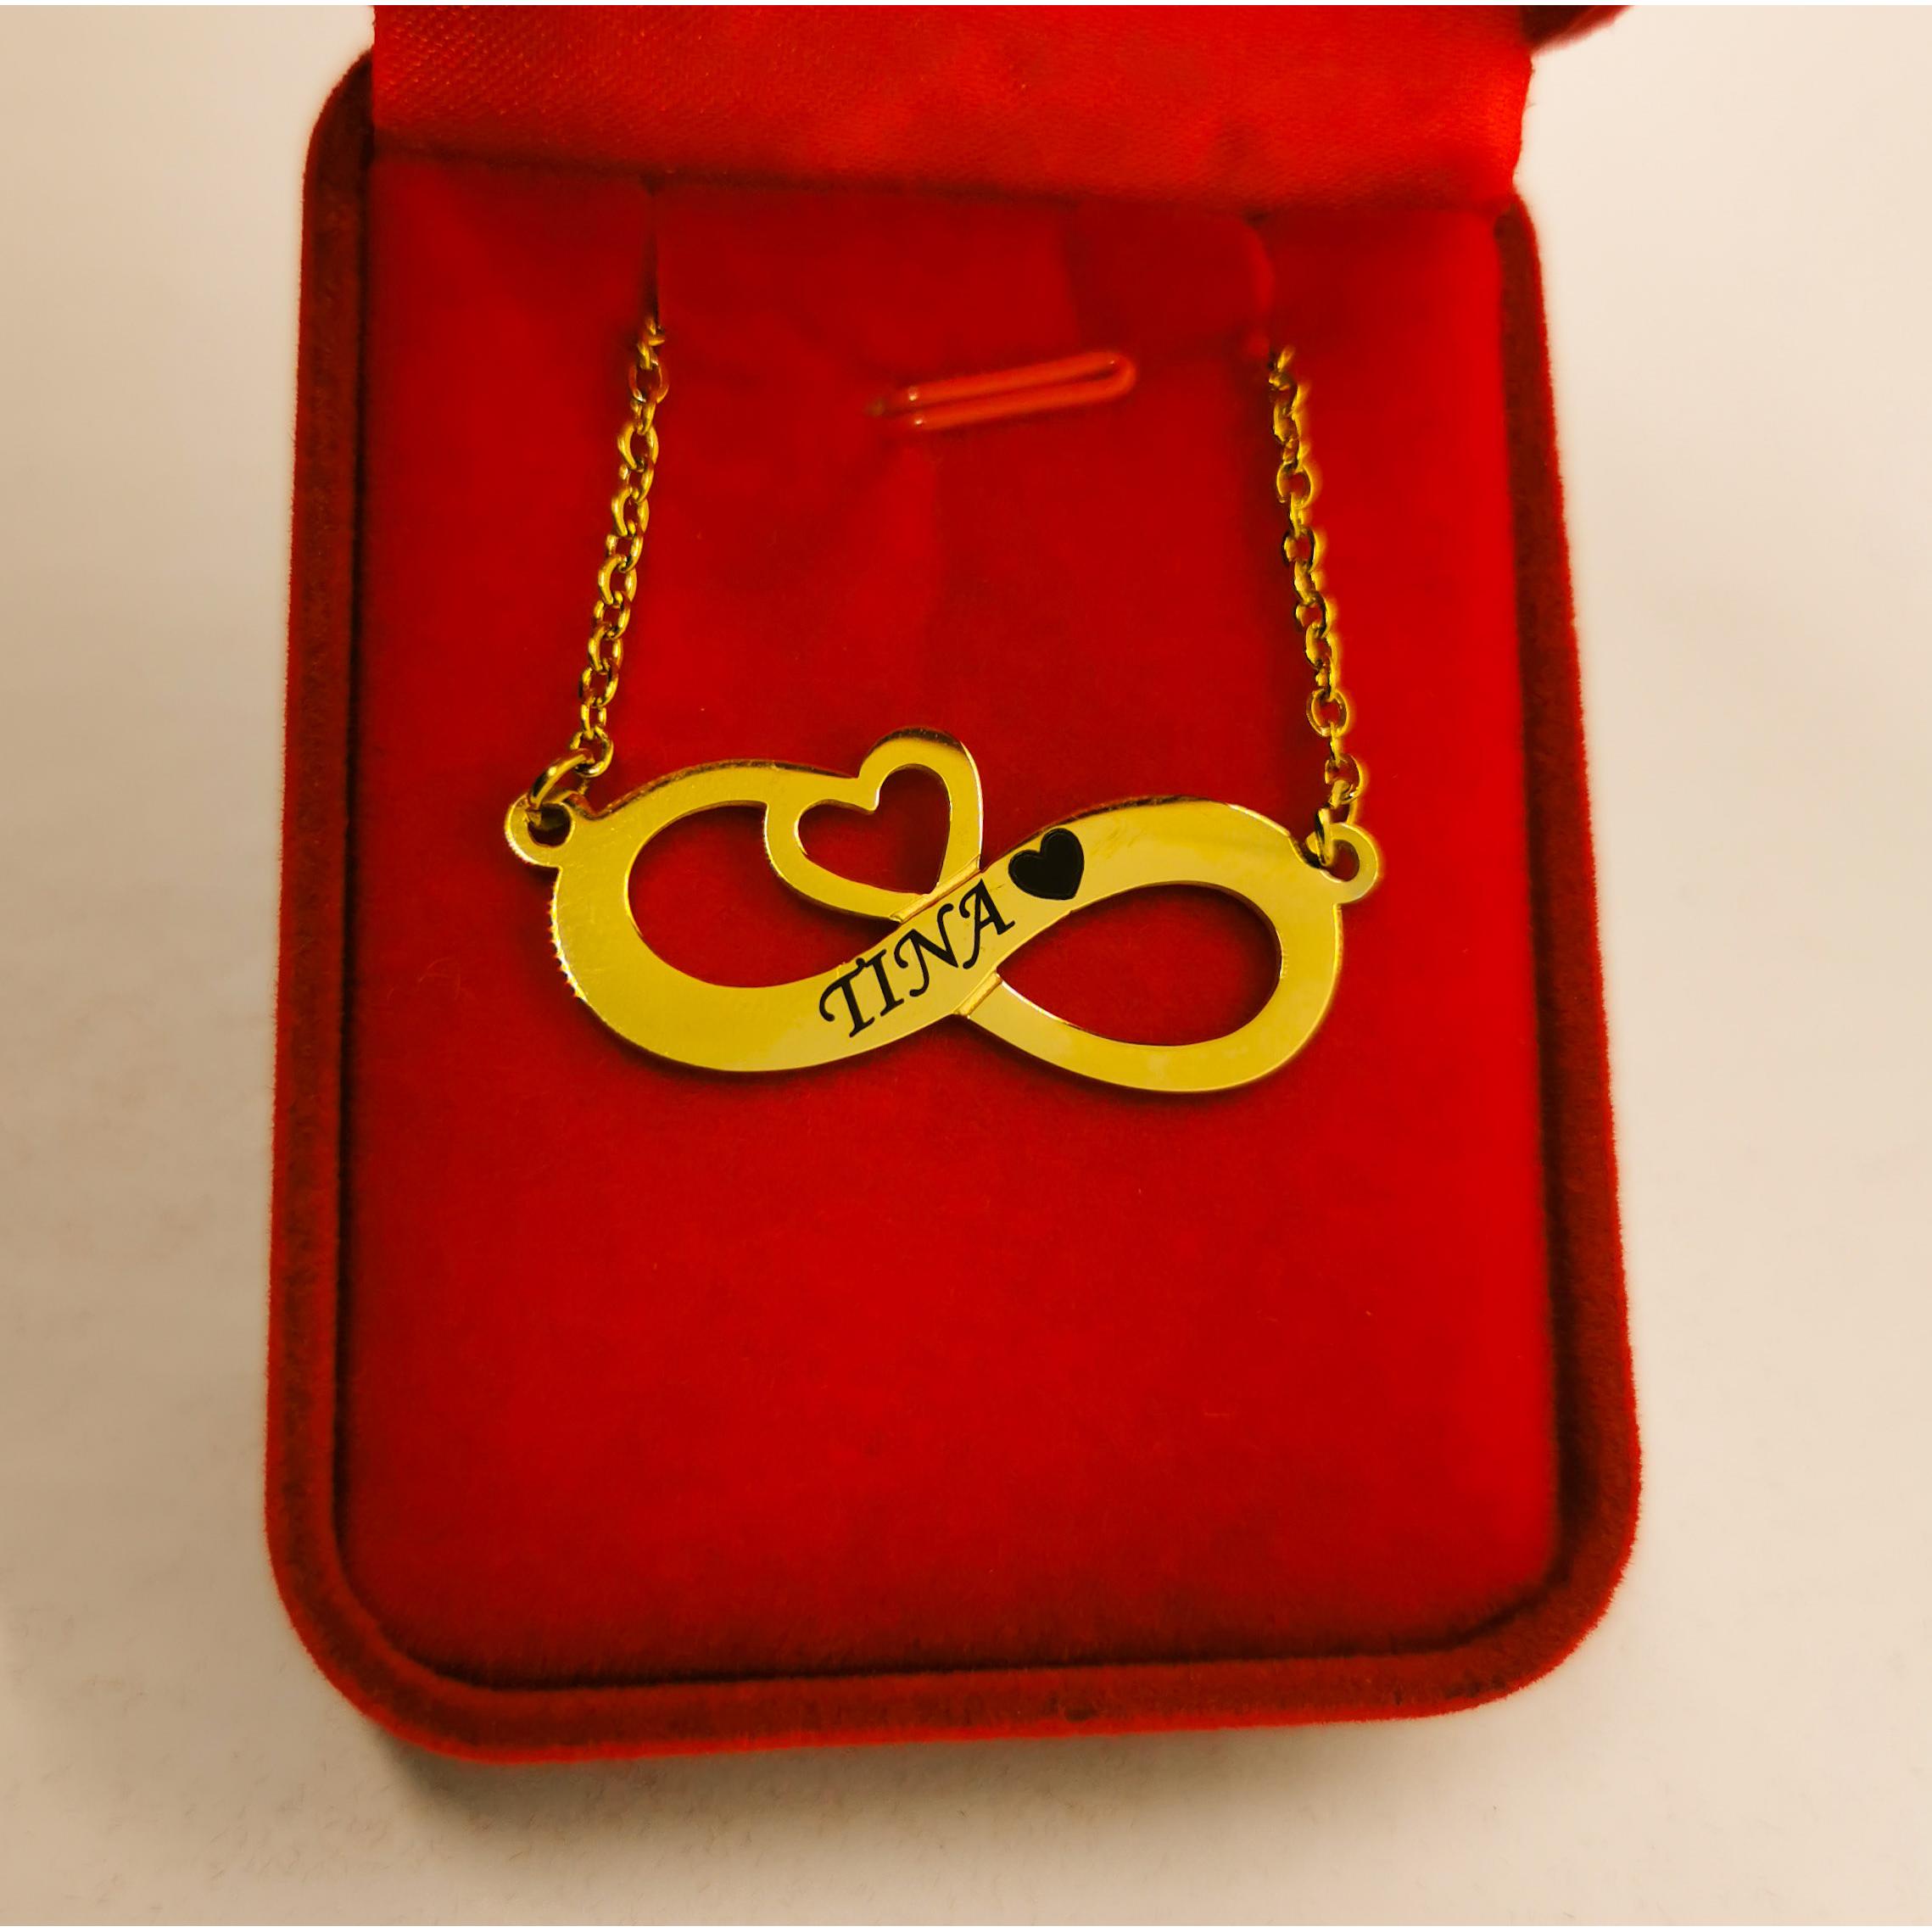 Engrave a Message of your Choice on Custom-Made Personalized Pendant Necklaces Gifts